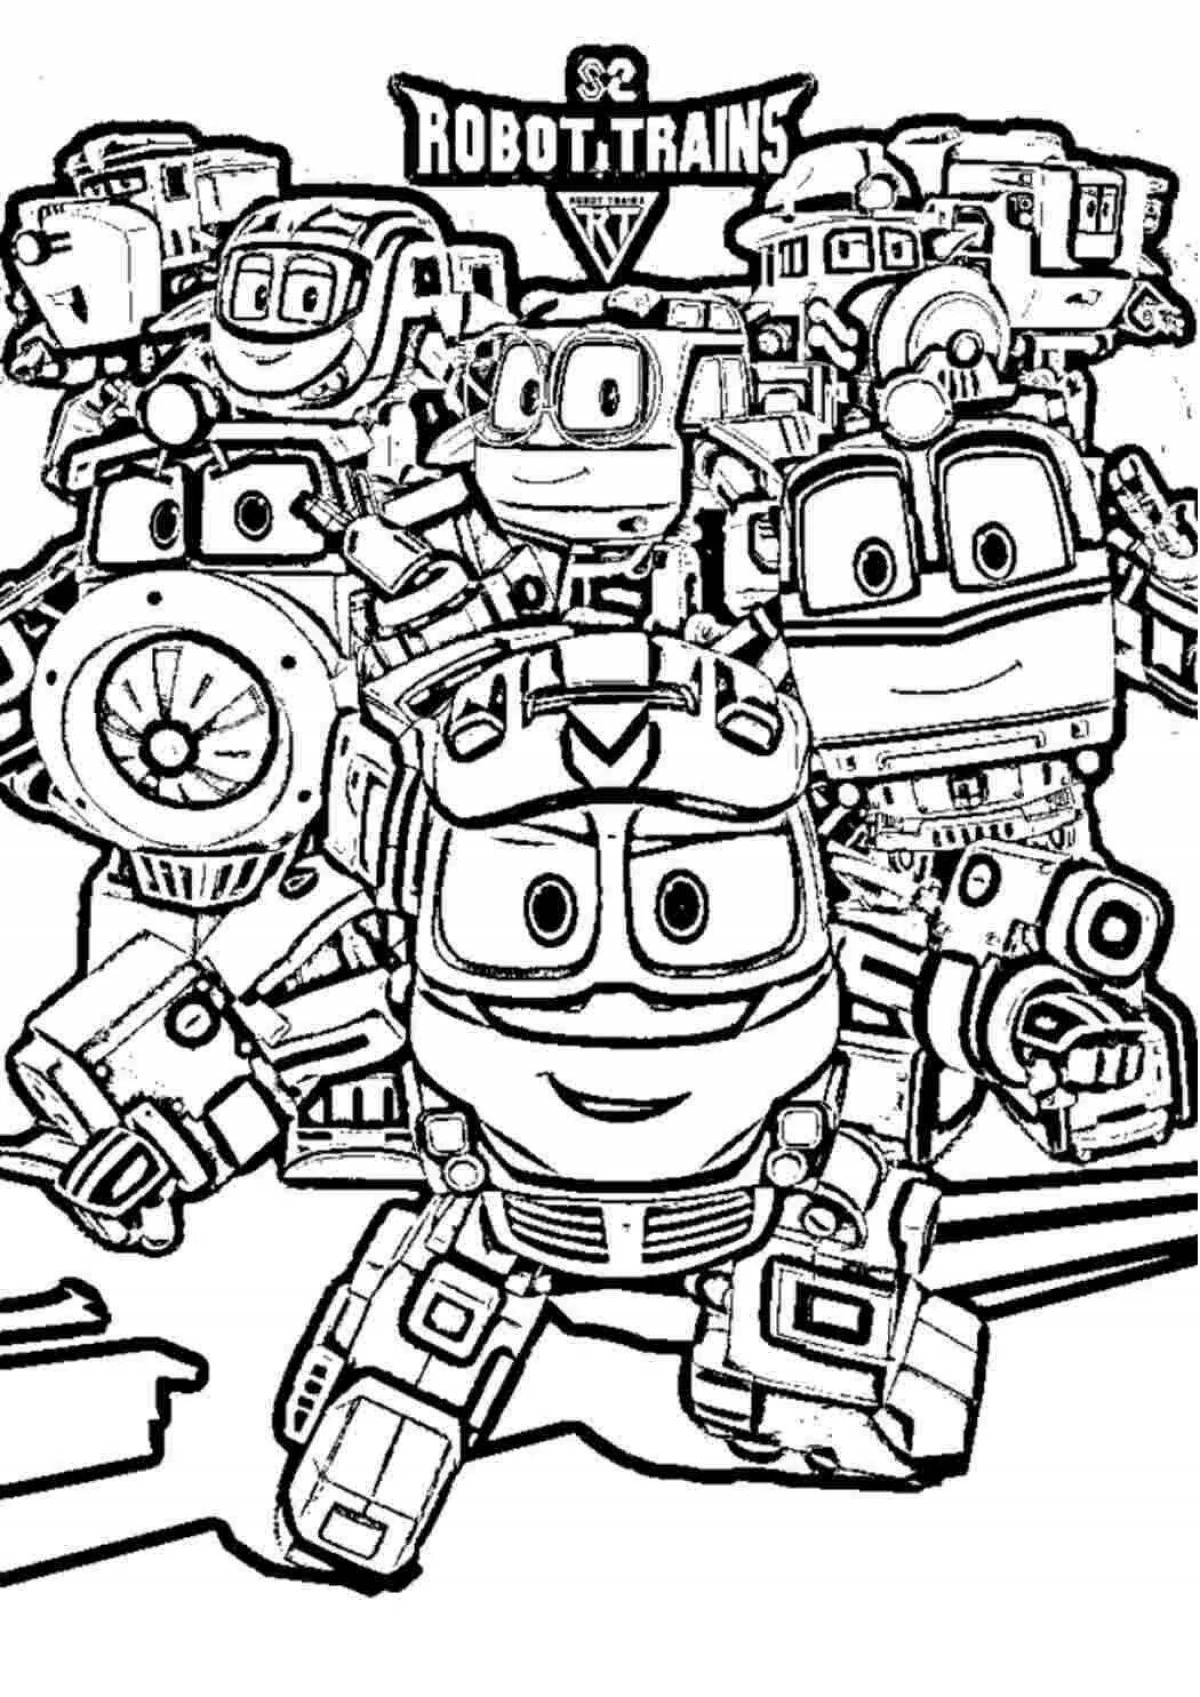 Color-frenzy robot train coloring page